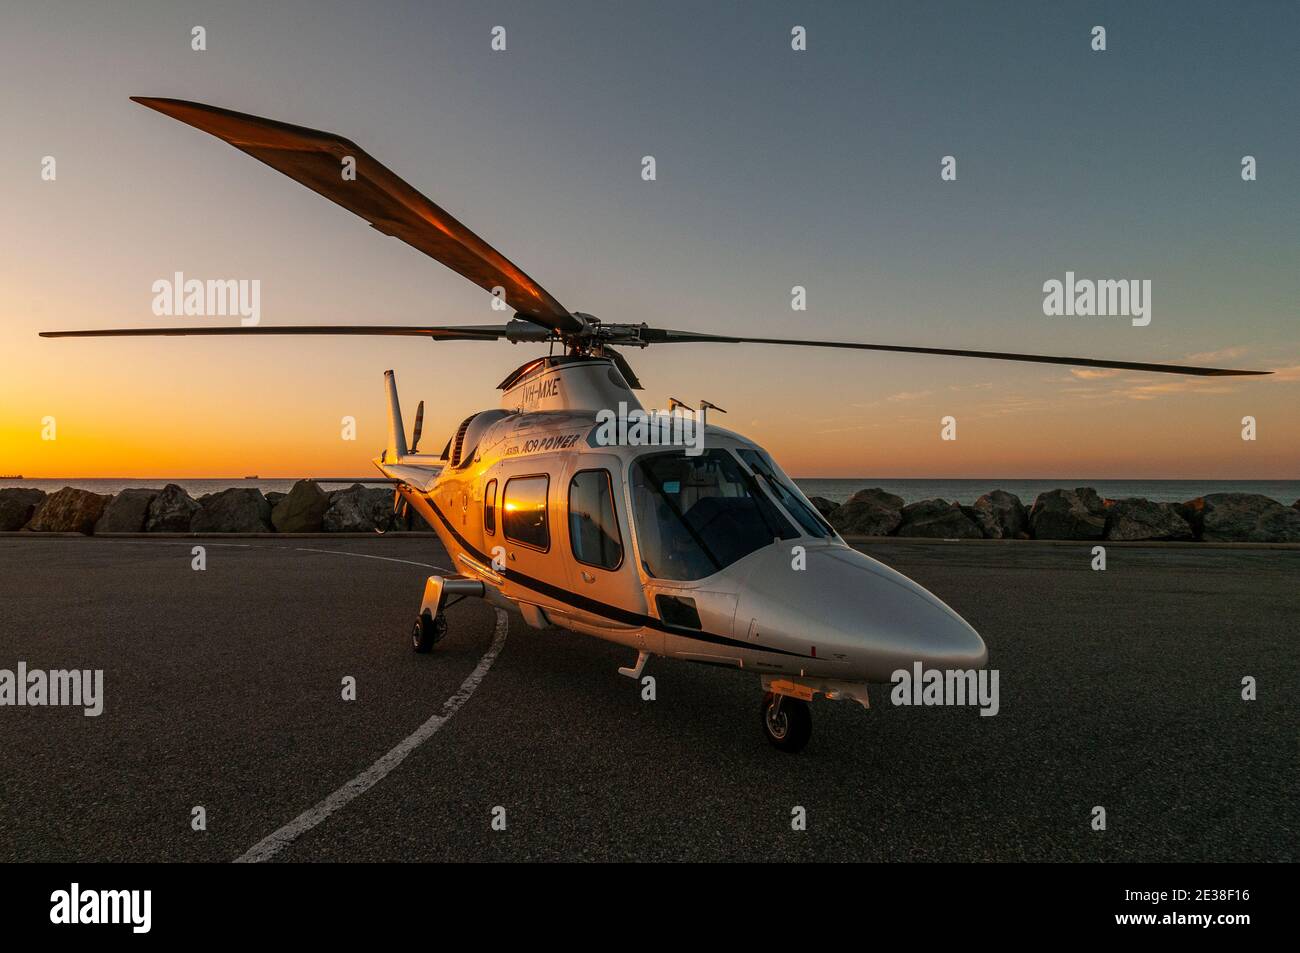 An Agusta 109 Power executive helicopter at sunset. Stock Photo